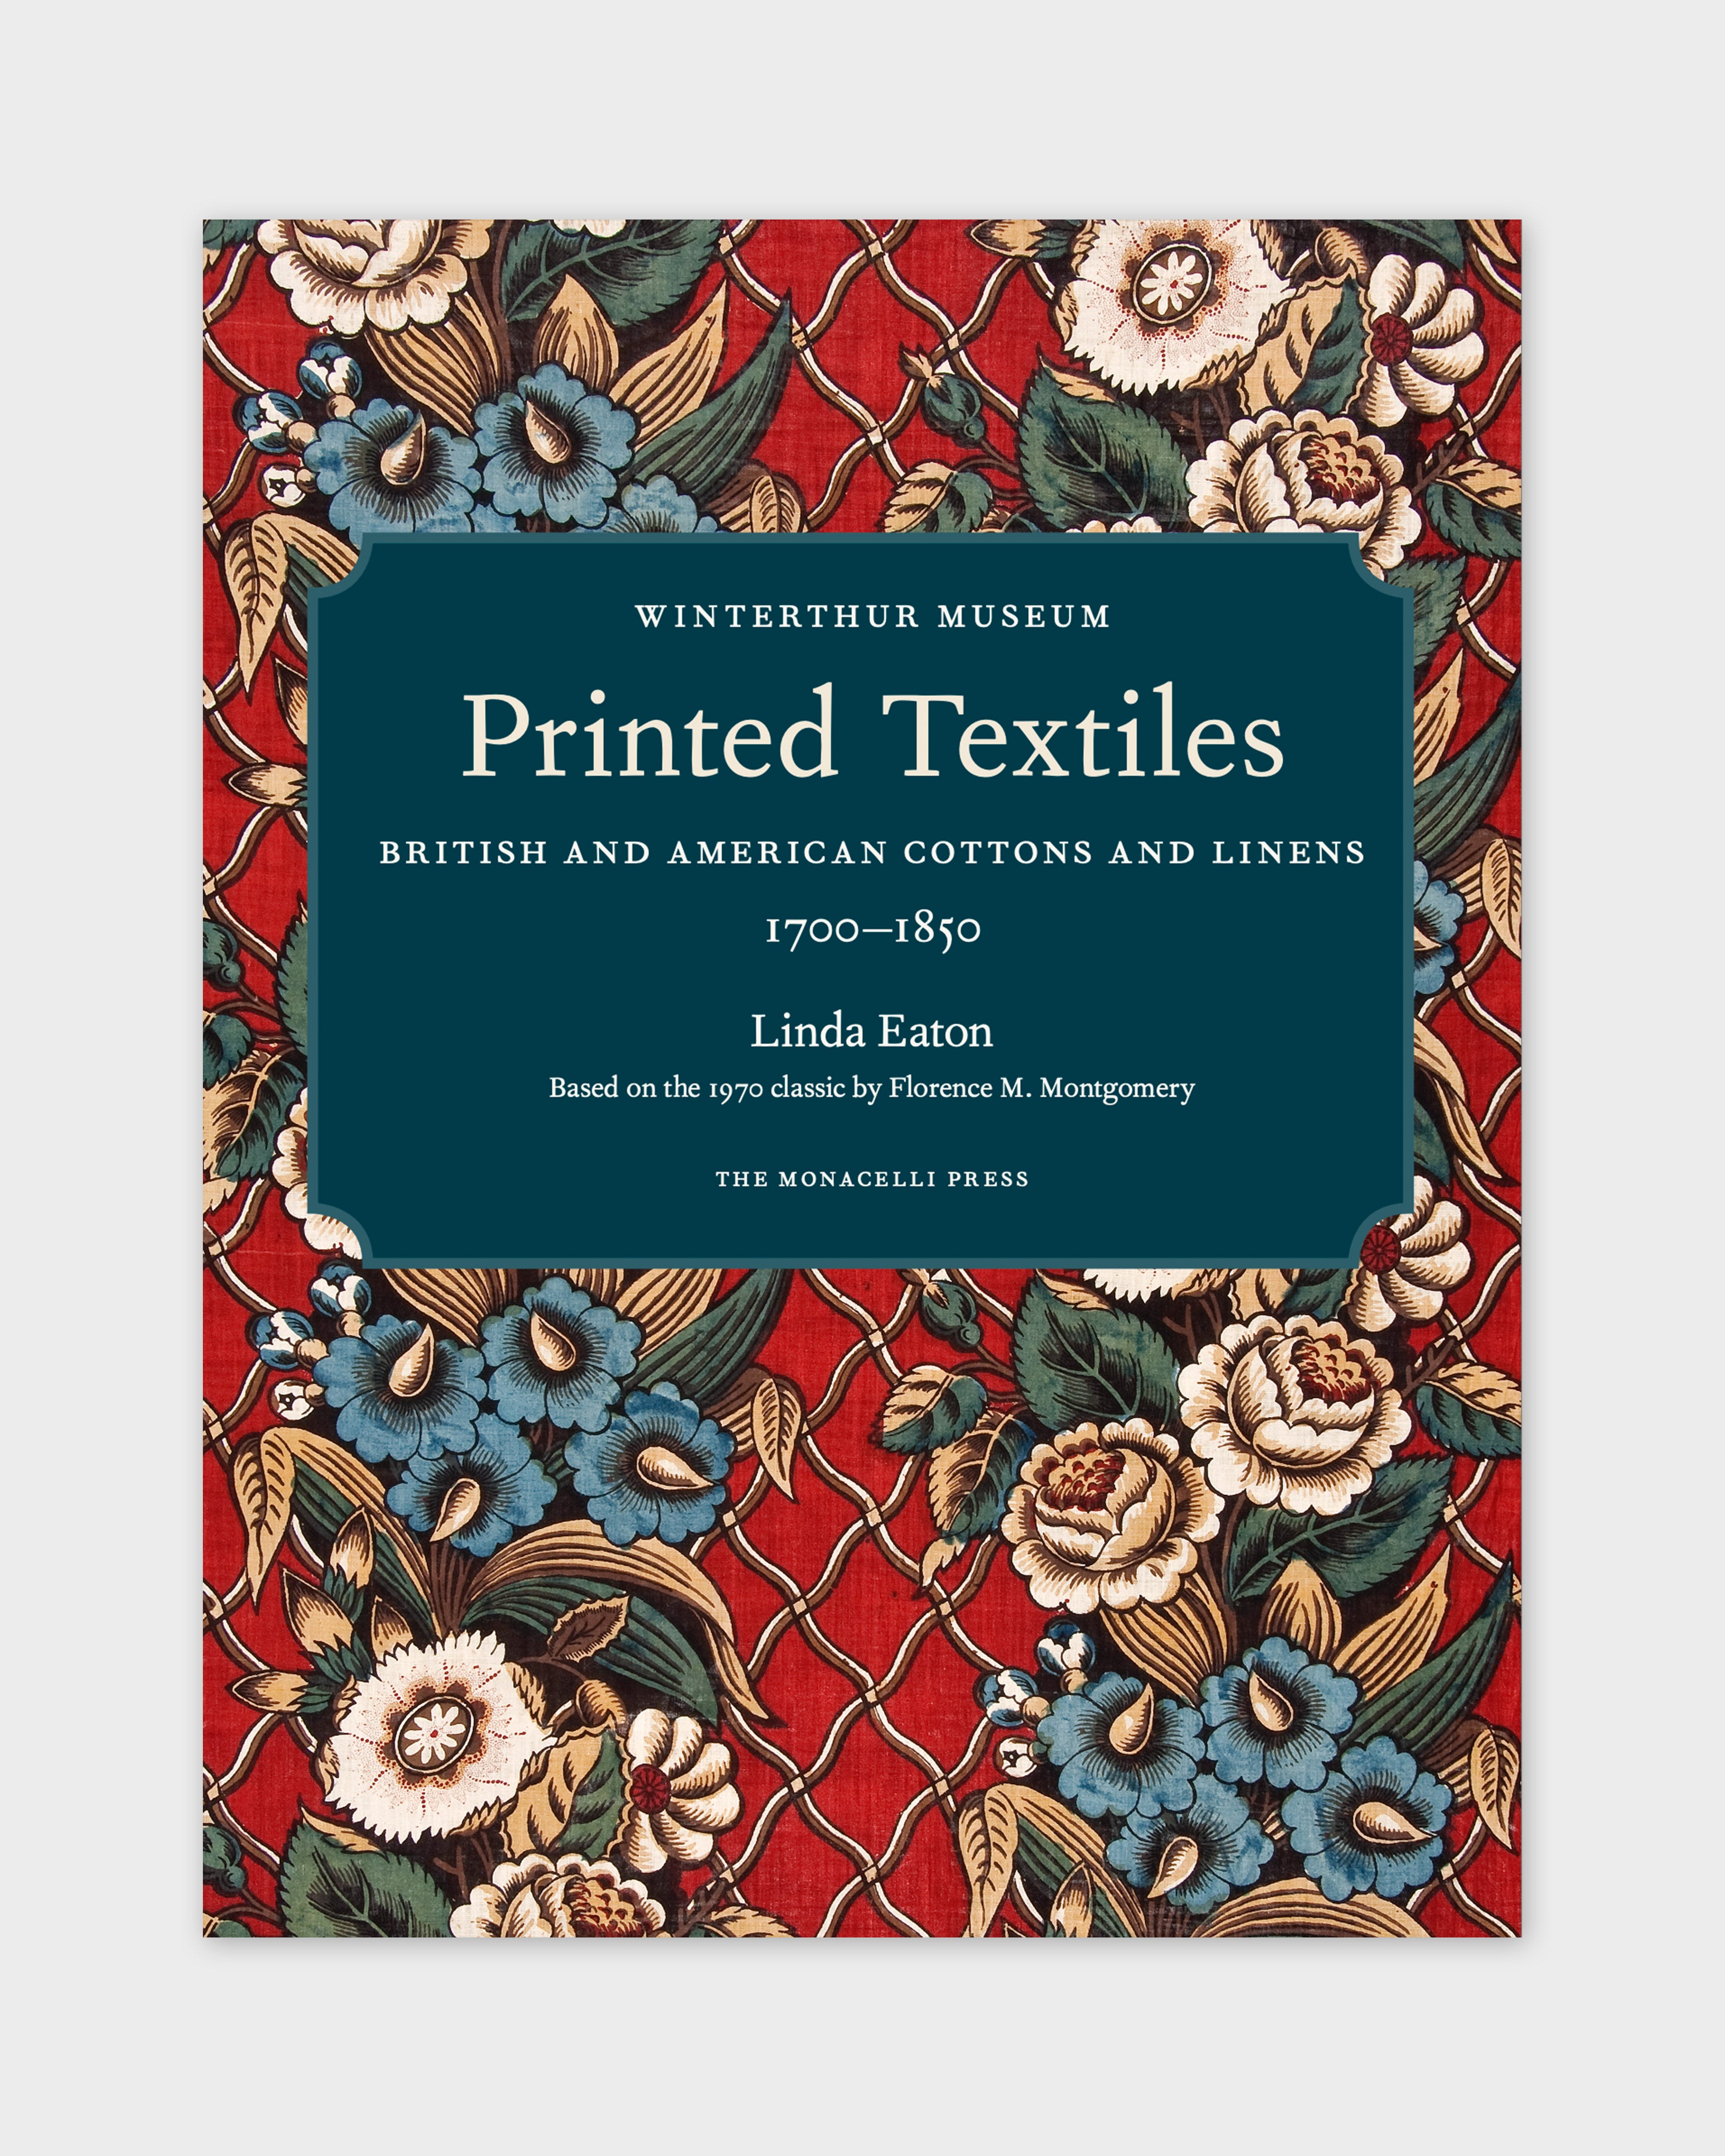 Printed Textiles, British and American Cottons and Linens, 1700–1850